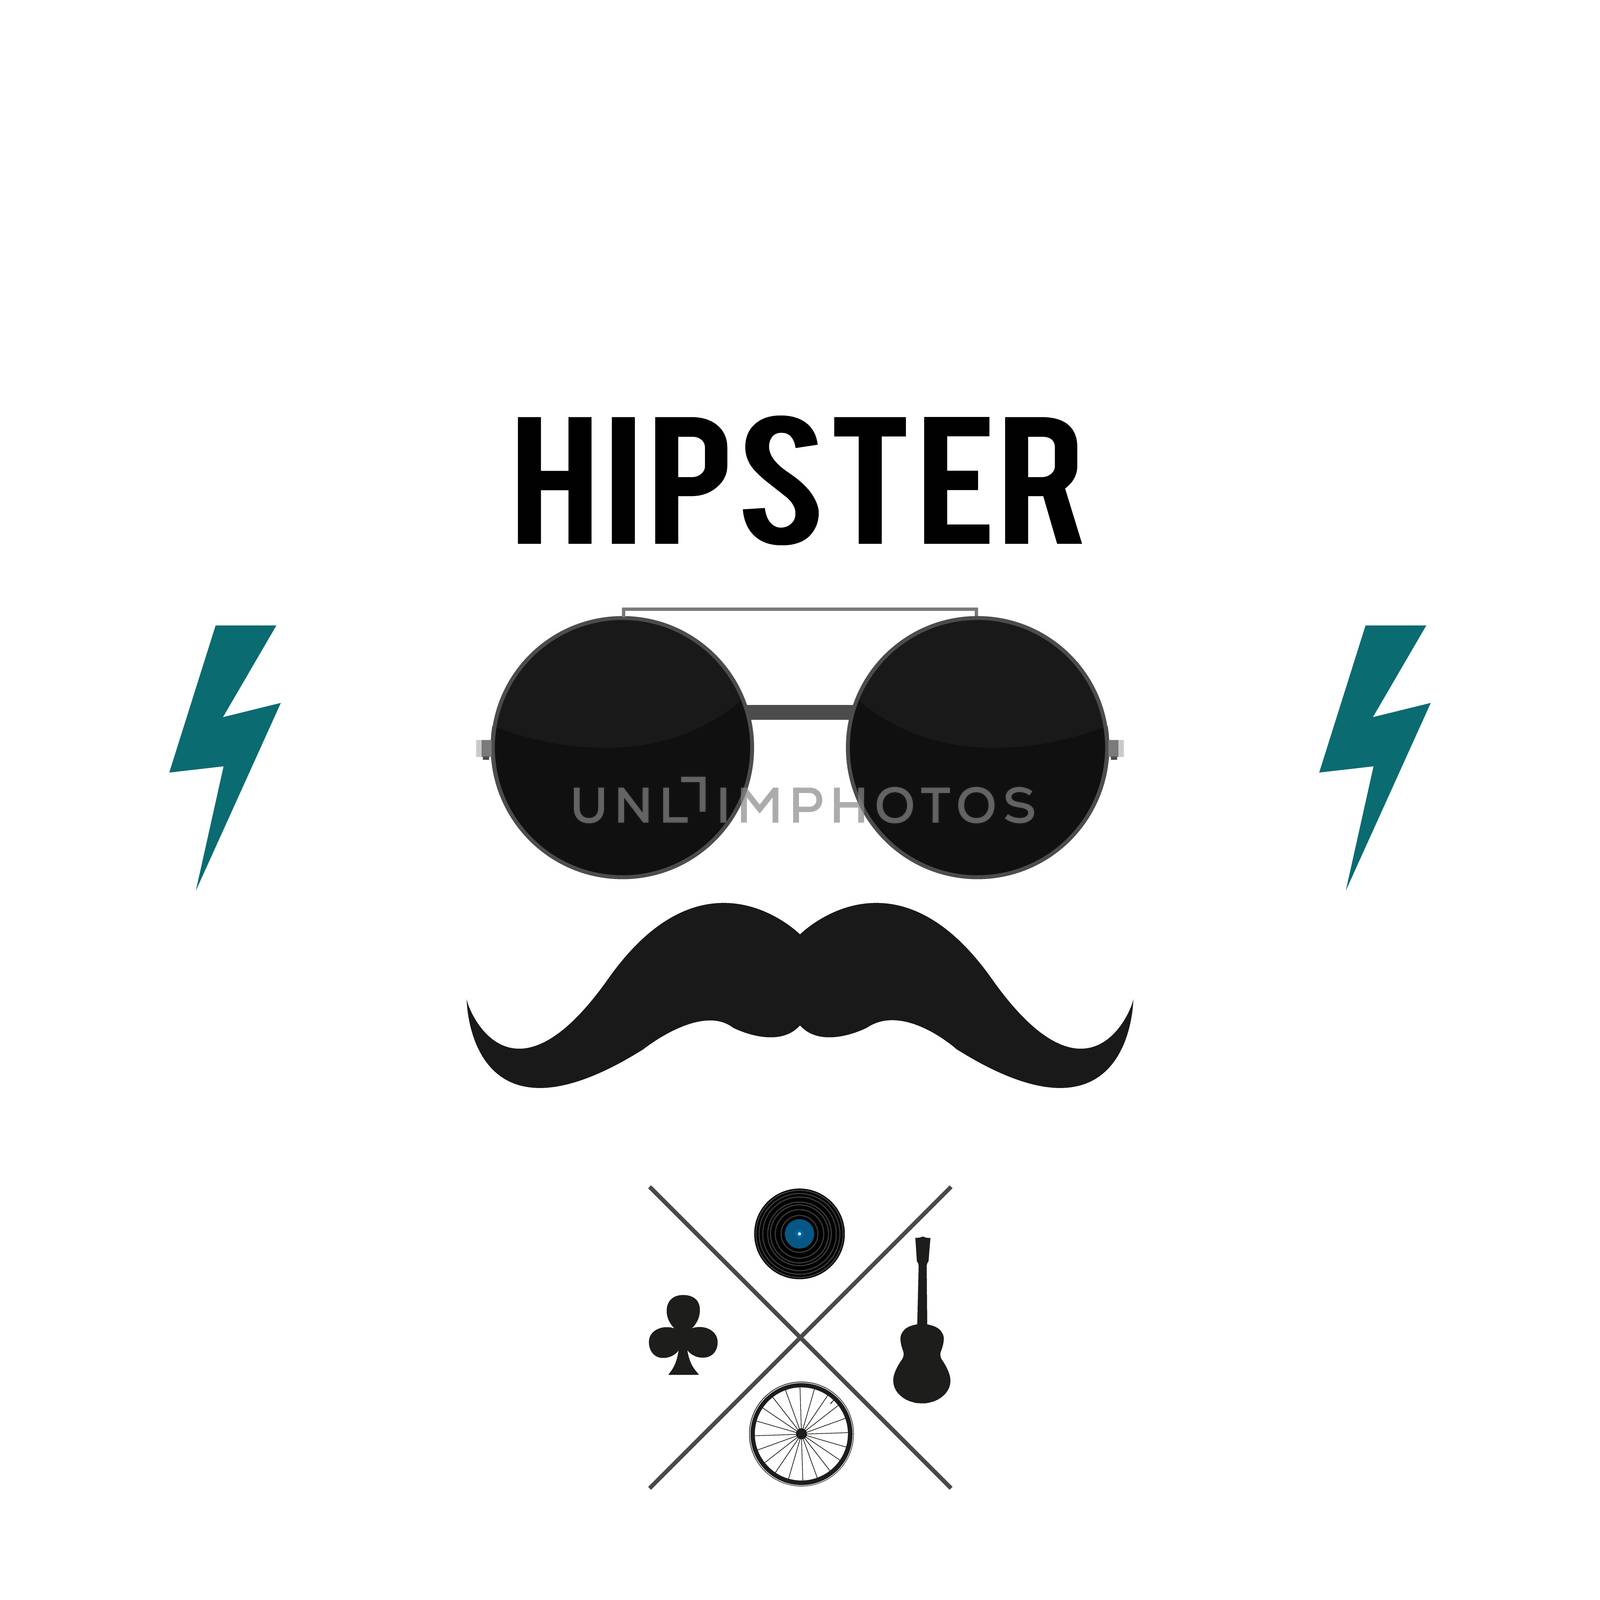 Be Hipster